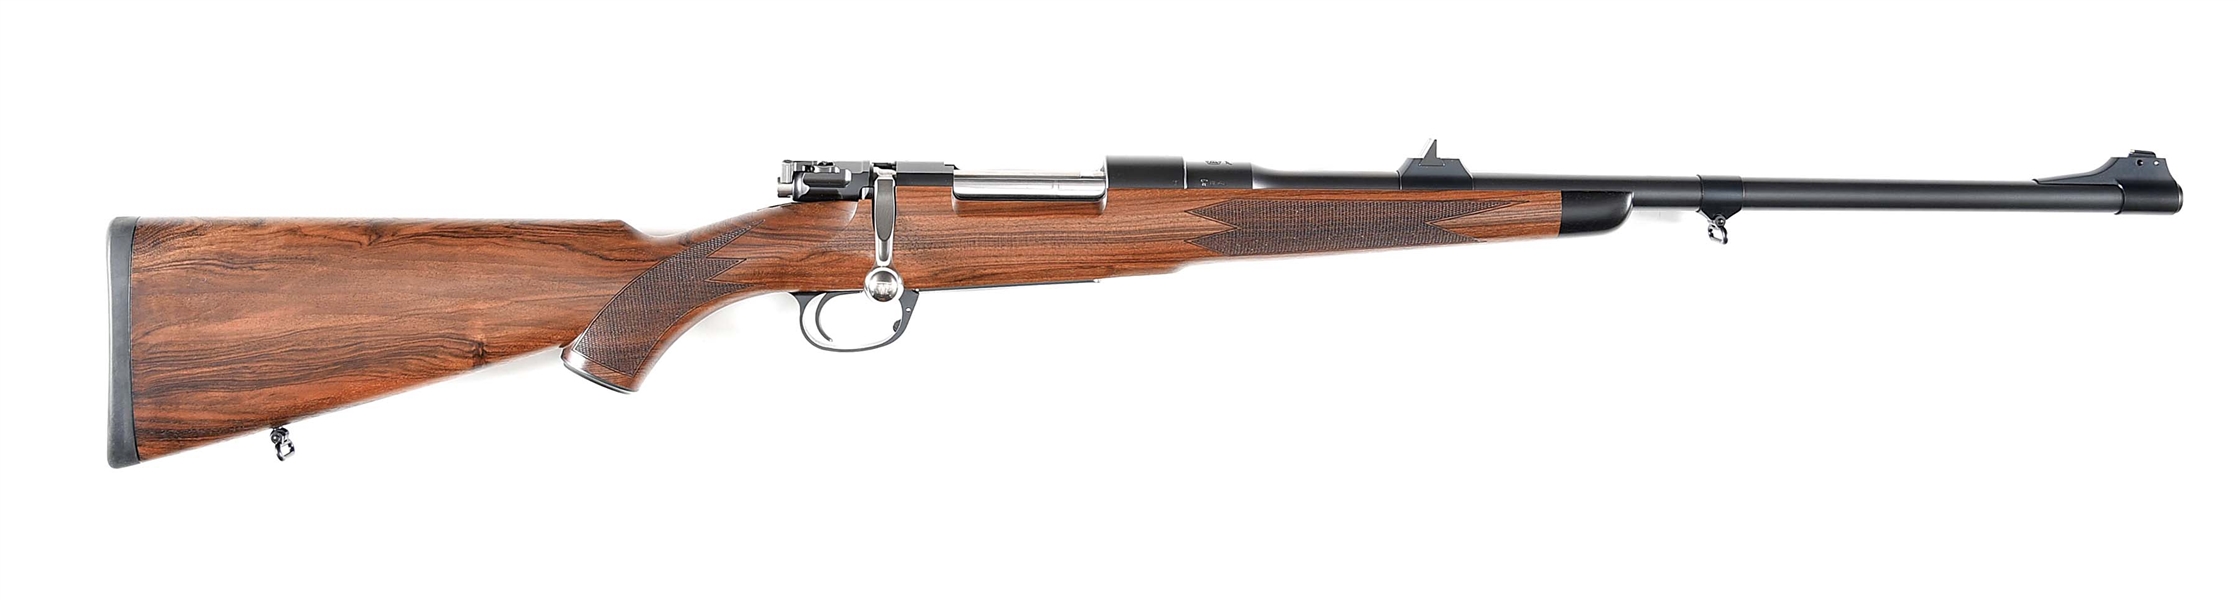 (M) LOVELY 8X57 IS MAUSER 98 BOLT ACTION RIFLE.